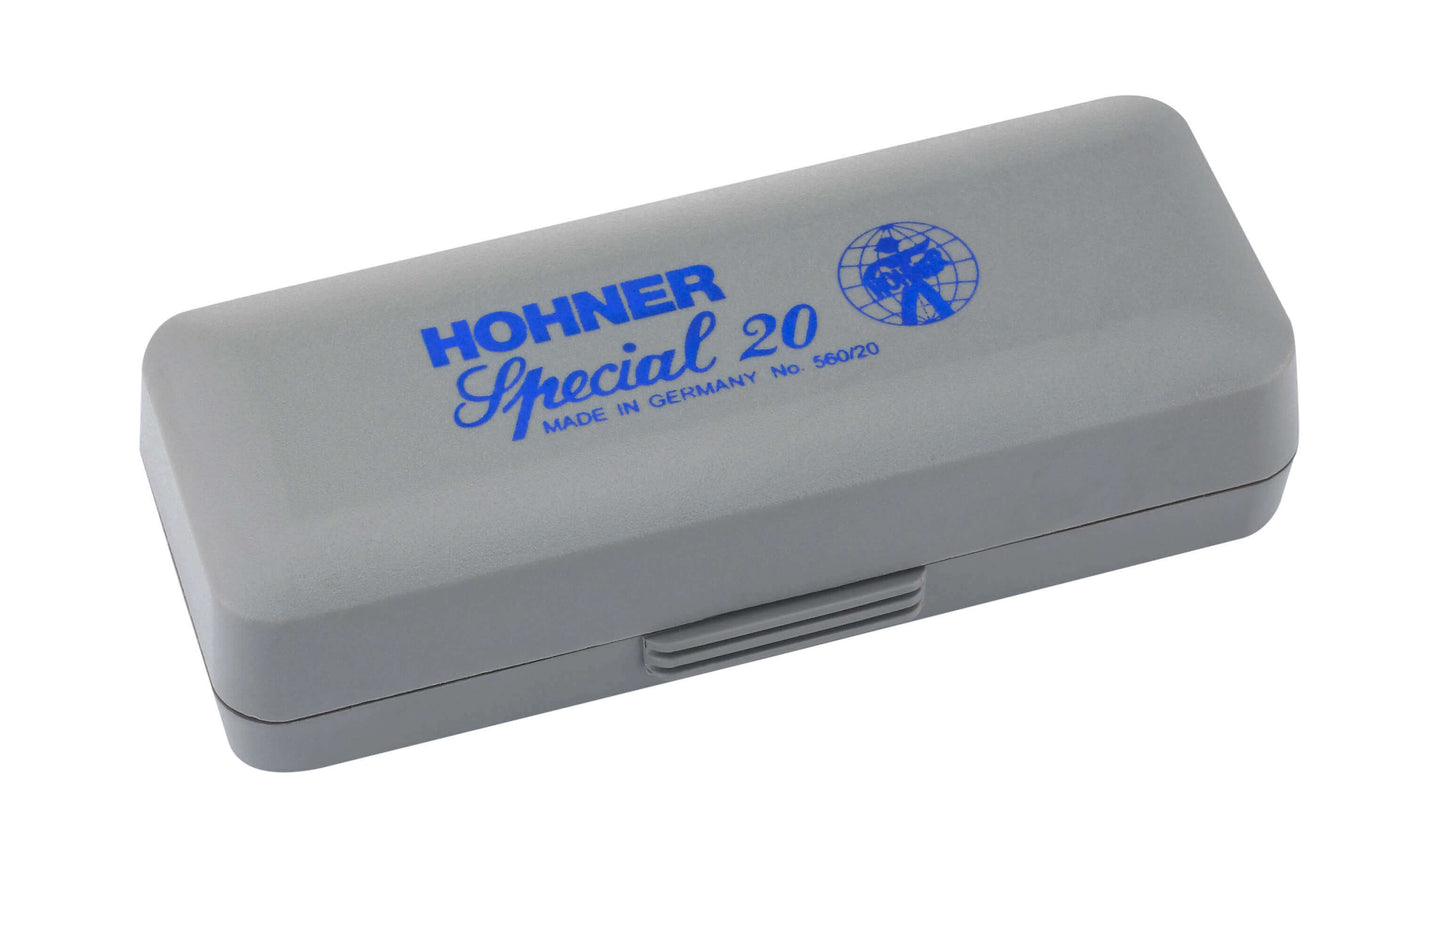 SPECIAL 20 HARMONICA BOXED KEY OF D